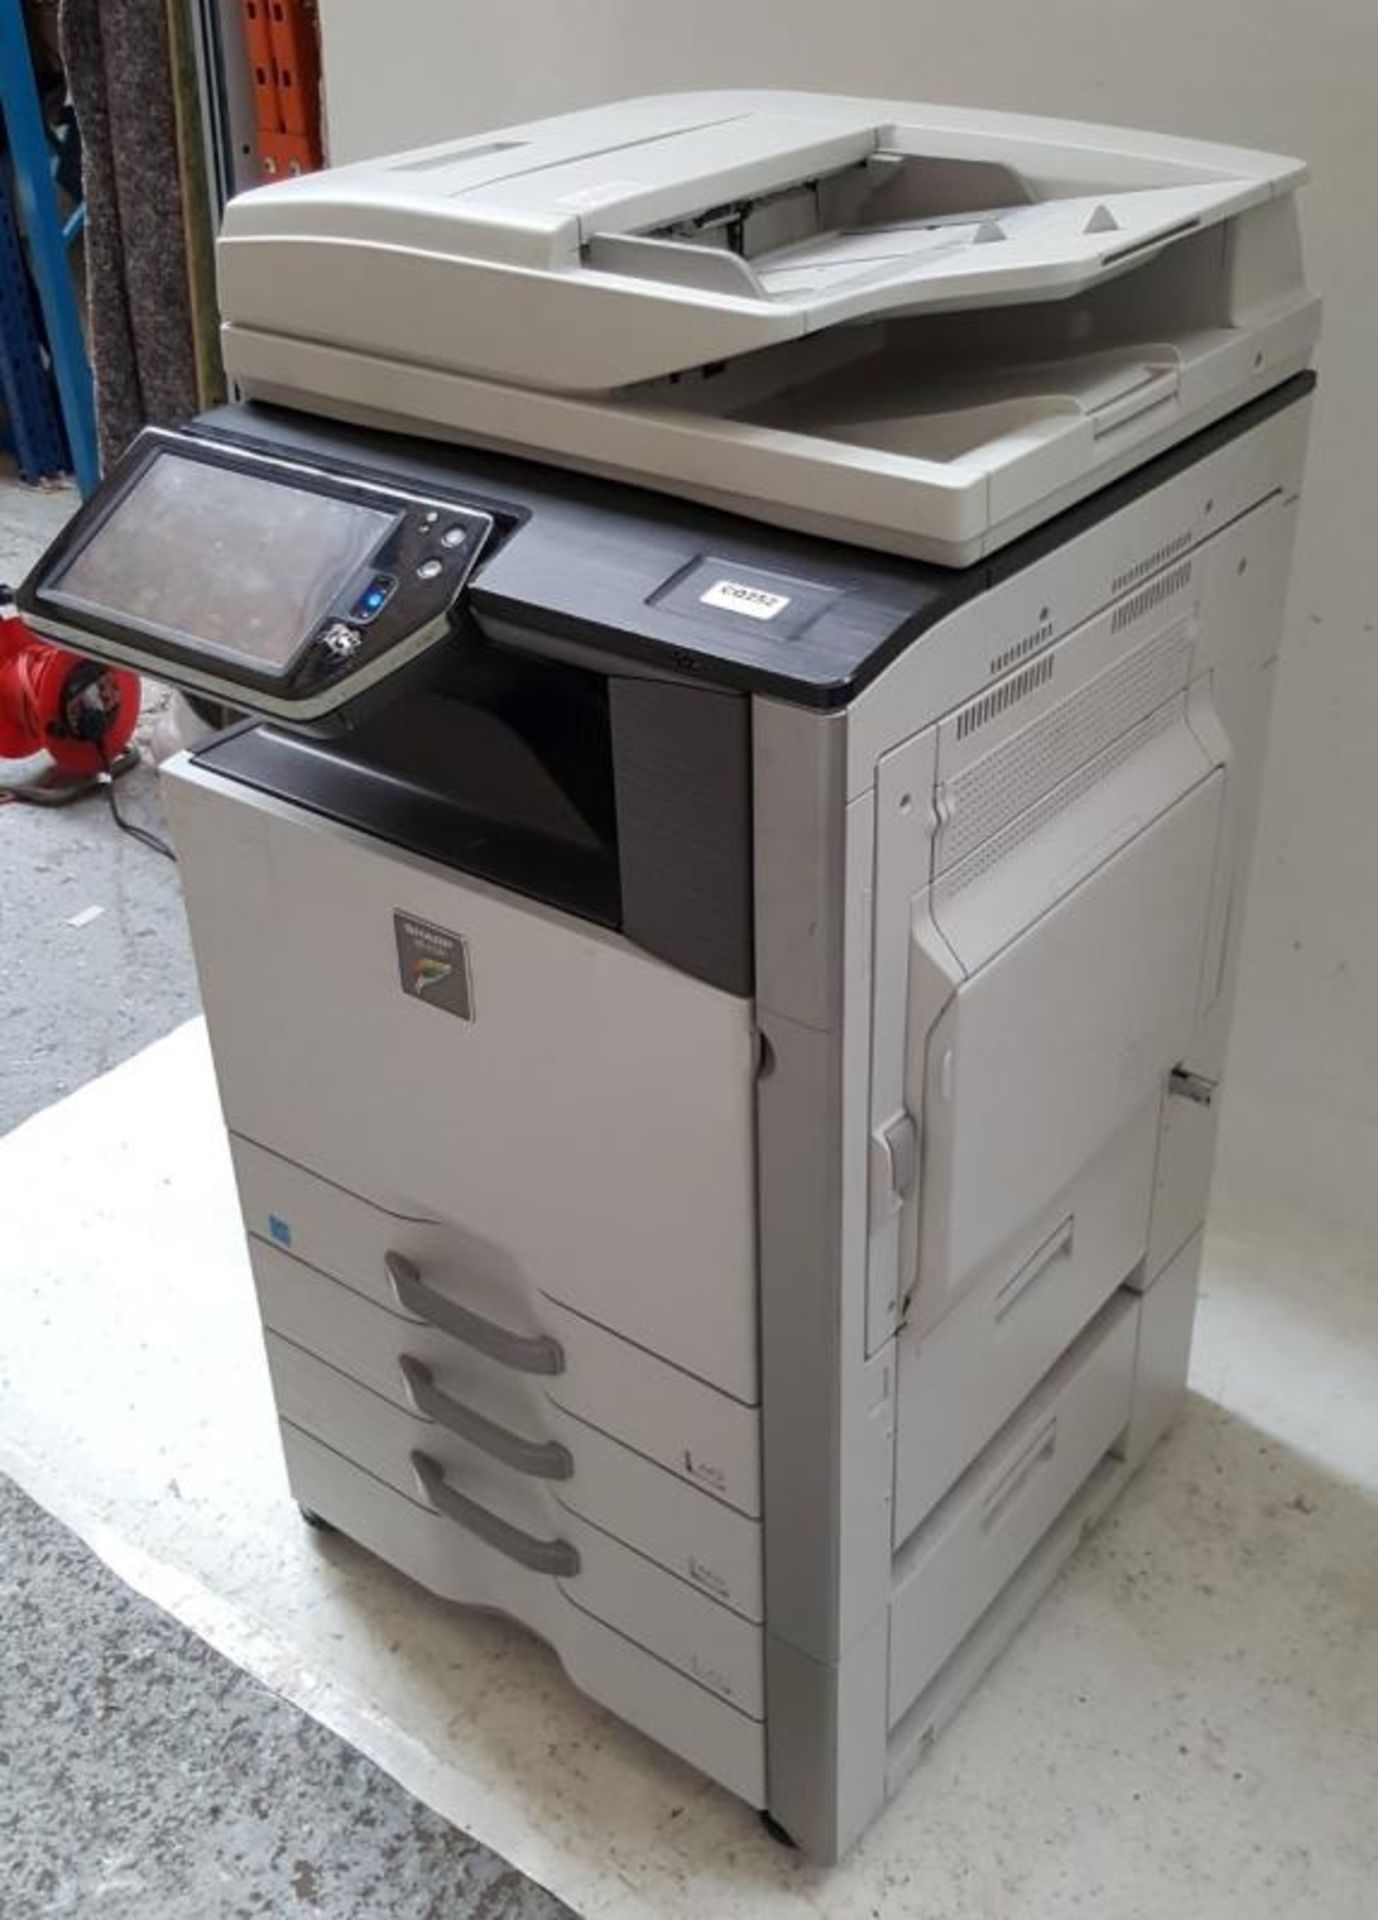 1 x Sharp MX-4112N Laser Office Printer Multifunction Device Copier Scanner (Has Come Out Of A Wor - Image 6 of 7